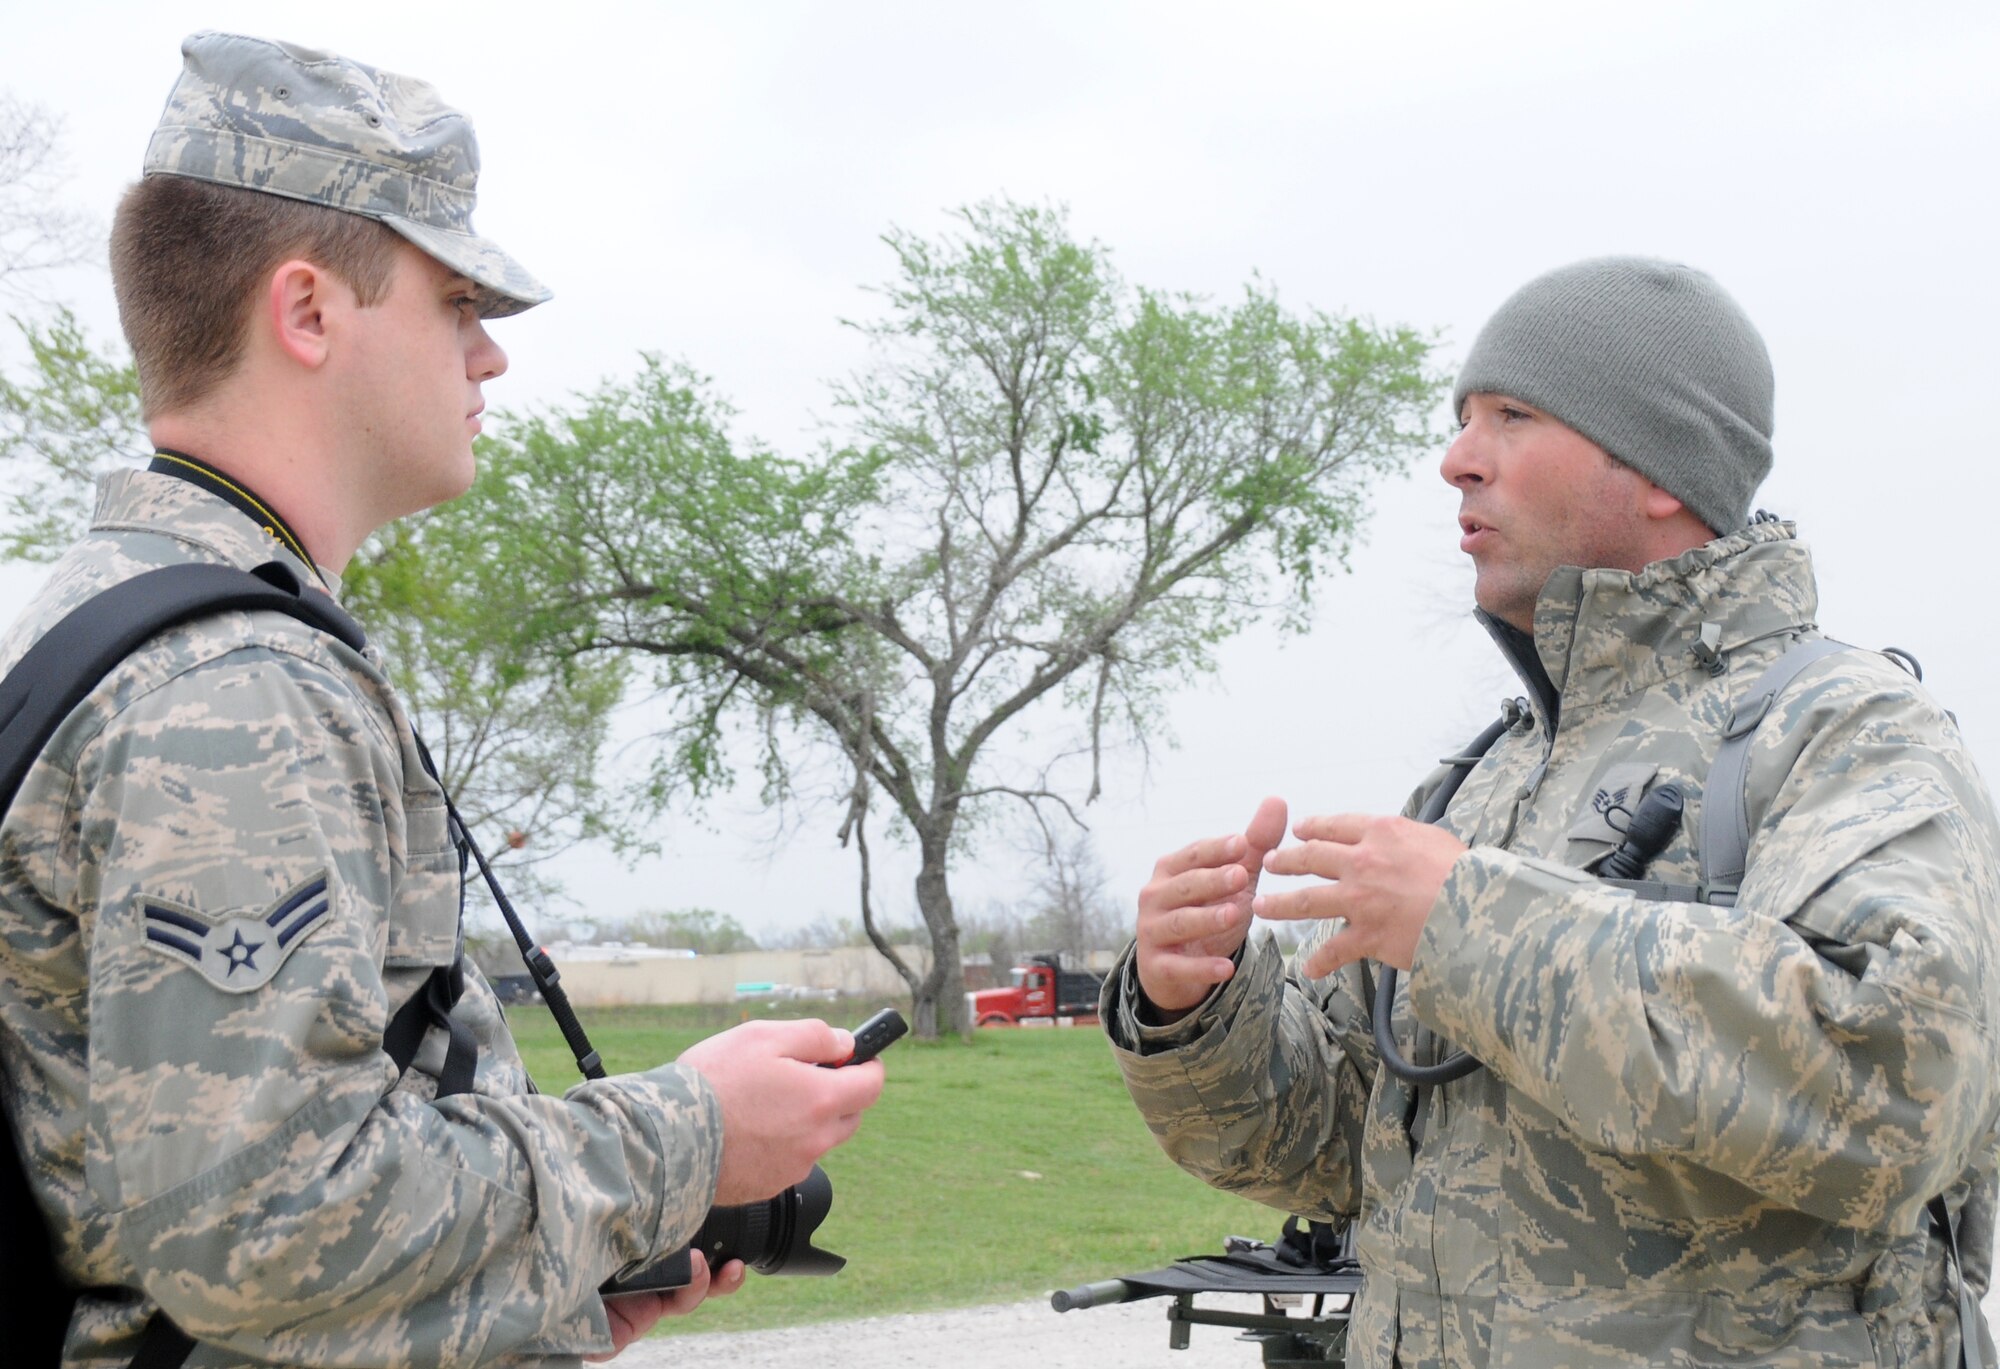 Airman 1st Class Cody Martin, a 188th Fighter Wing photojournalist, interviews Staff Sgt. James Hammock of the 238th Chemical Company, Indiana National Guard, about his part in the Vigilant Guard exercise. Martin helped document the exercise and provided photo and video products to units and civilians in six states. (U.S. Air National Guard photo by Senior Airman John Hillier/188th Fighter Wing Public Affairs)